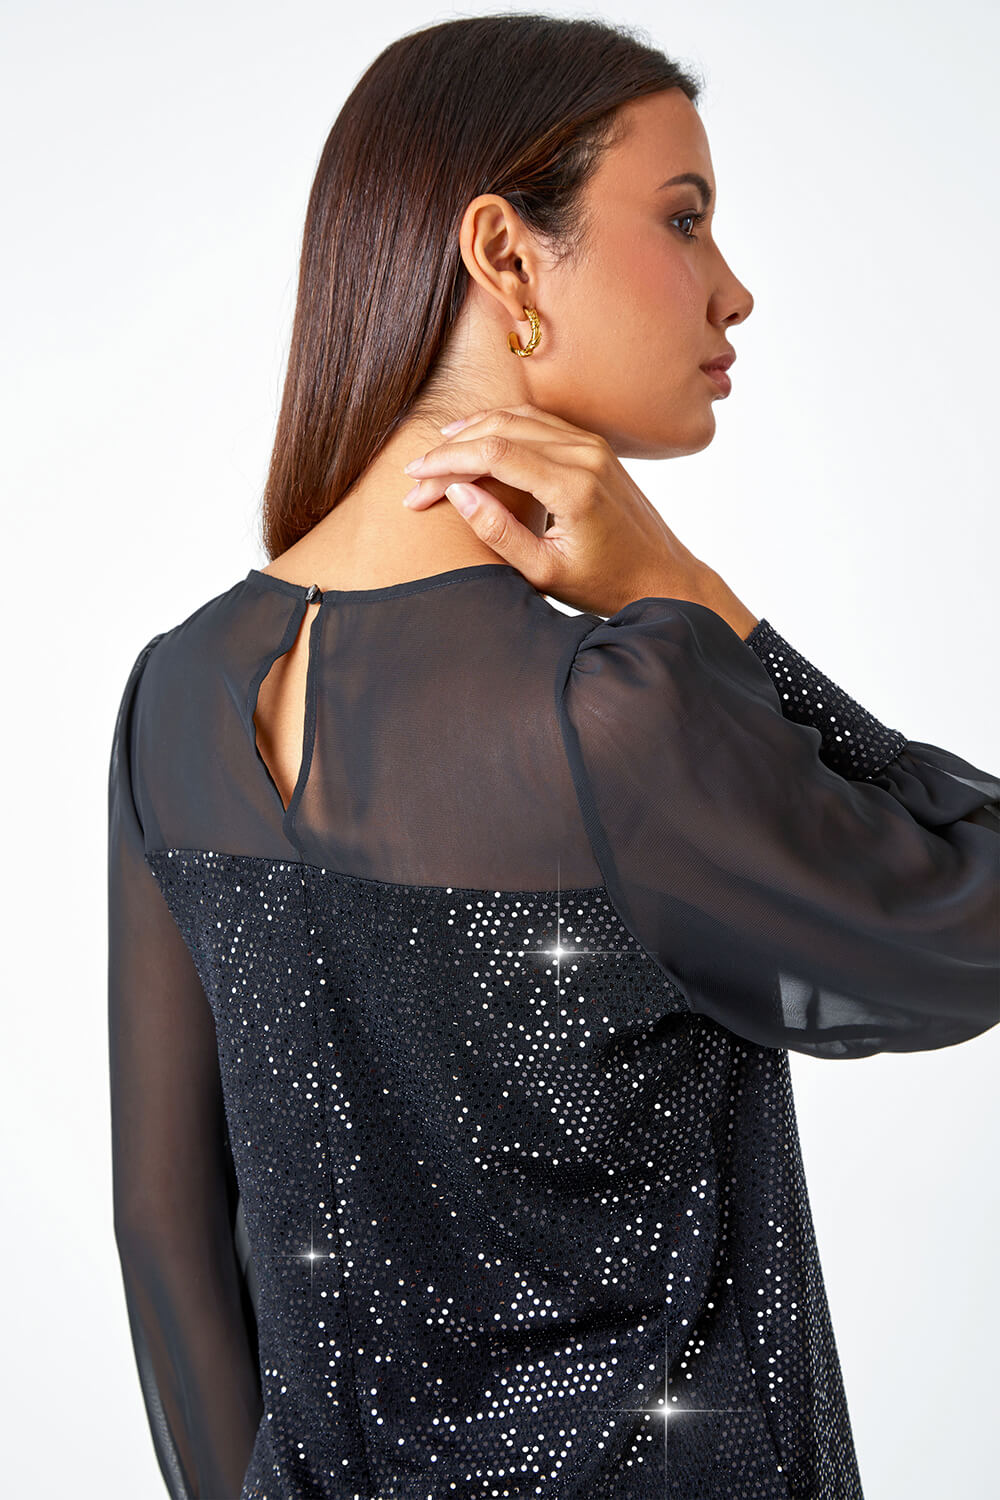 Black Sequin Chiffon Sleeve Stretch Top, Image 4 of 5